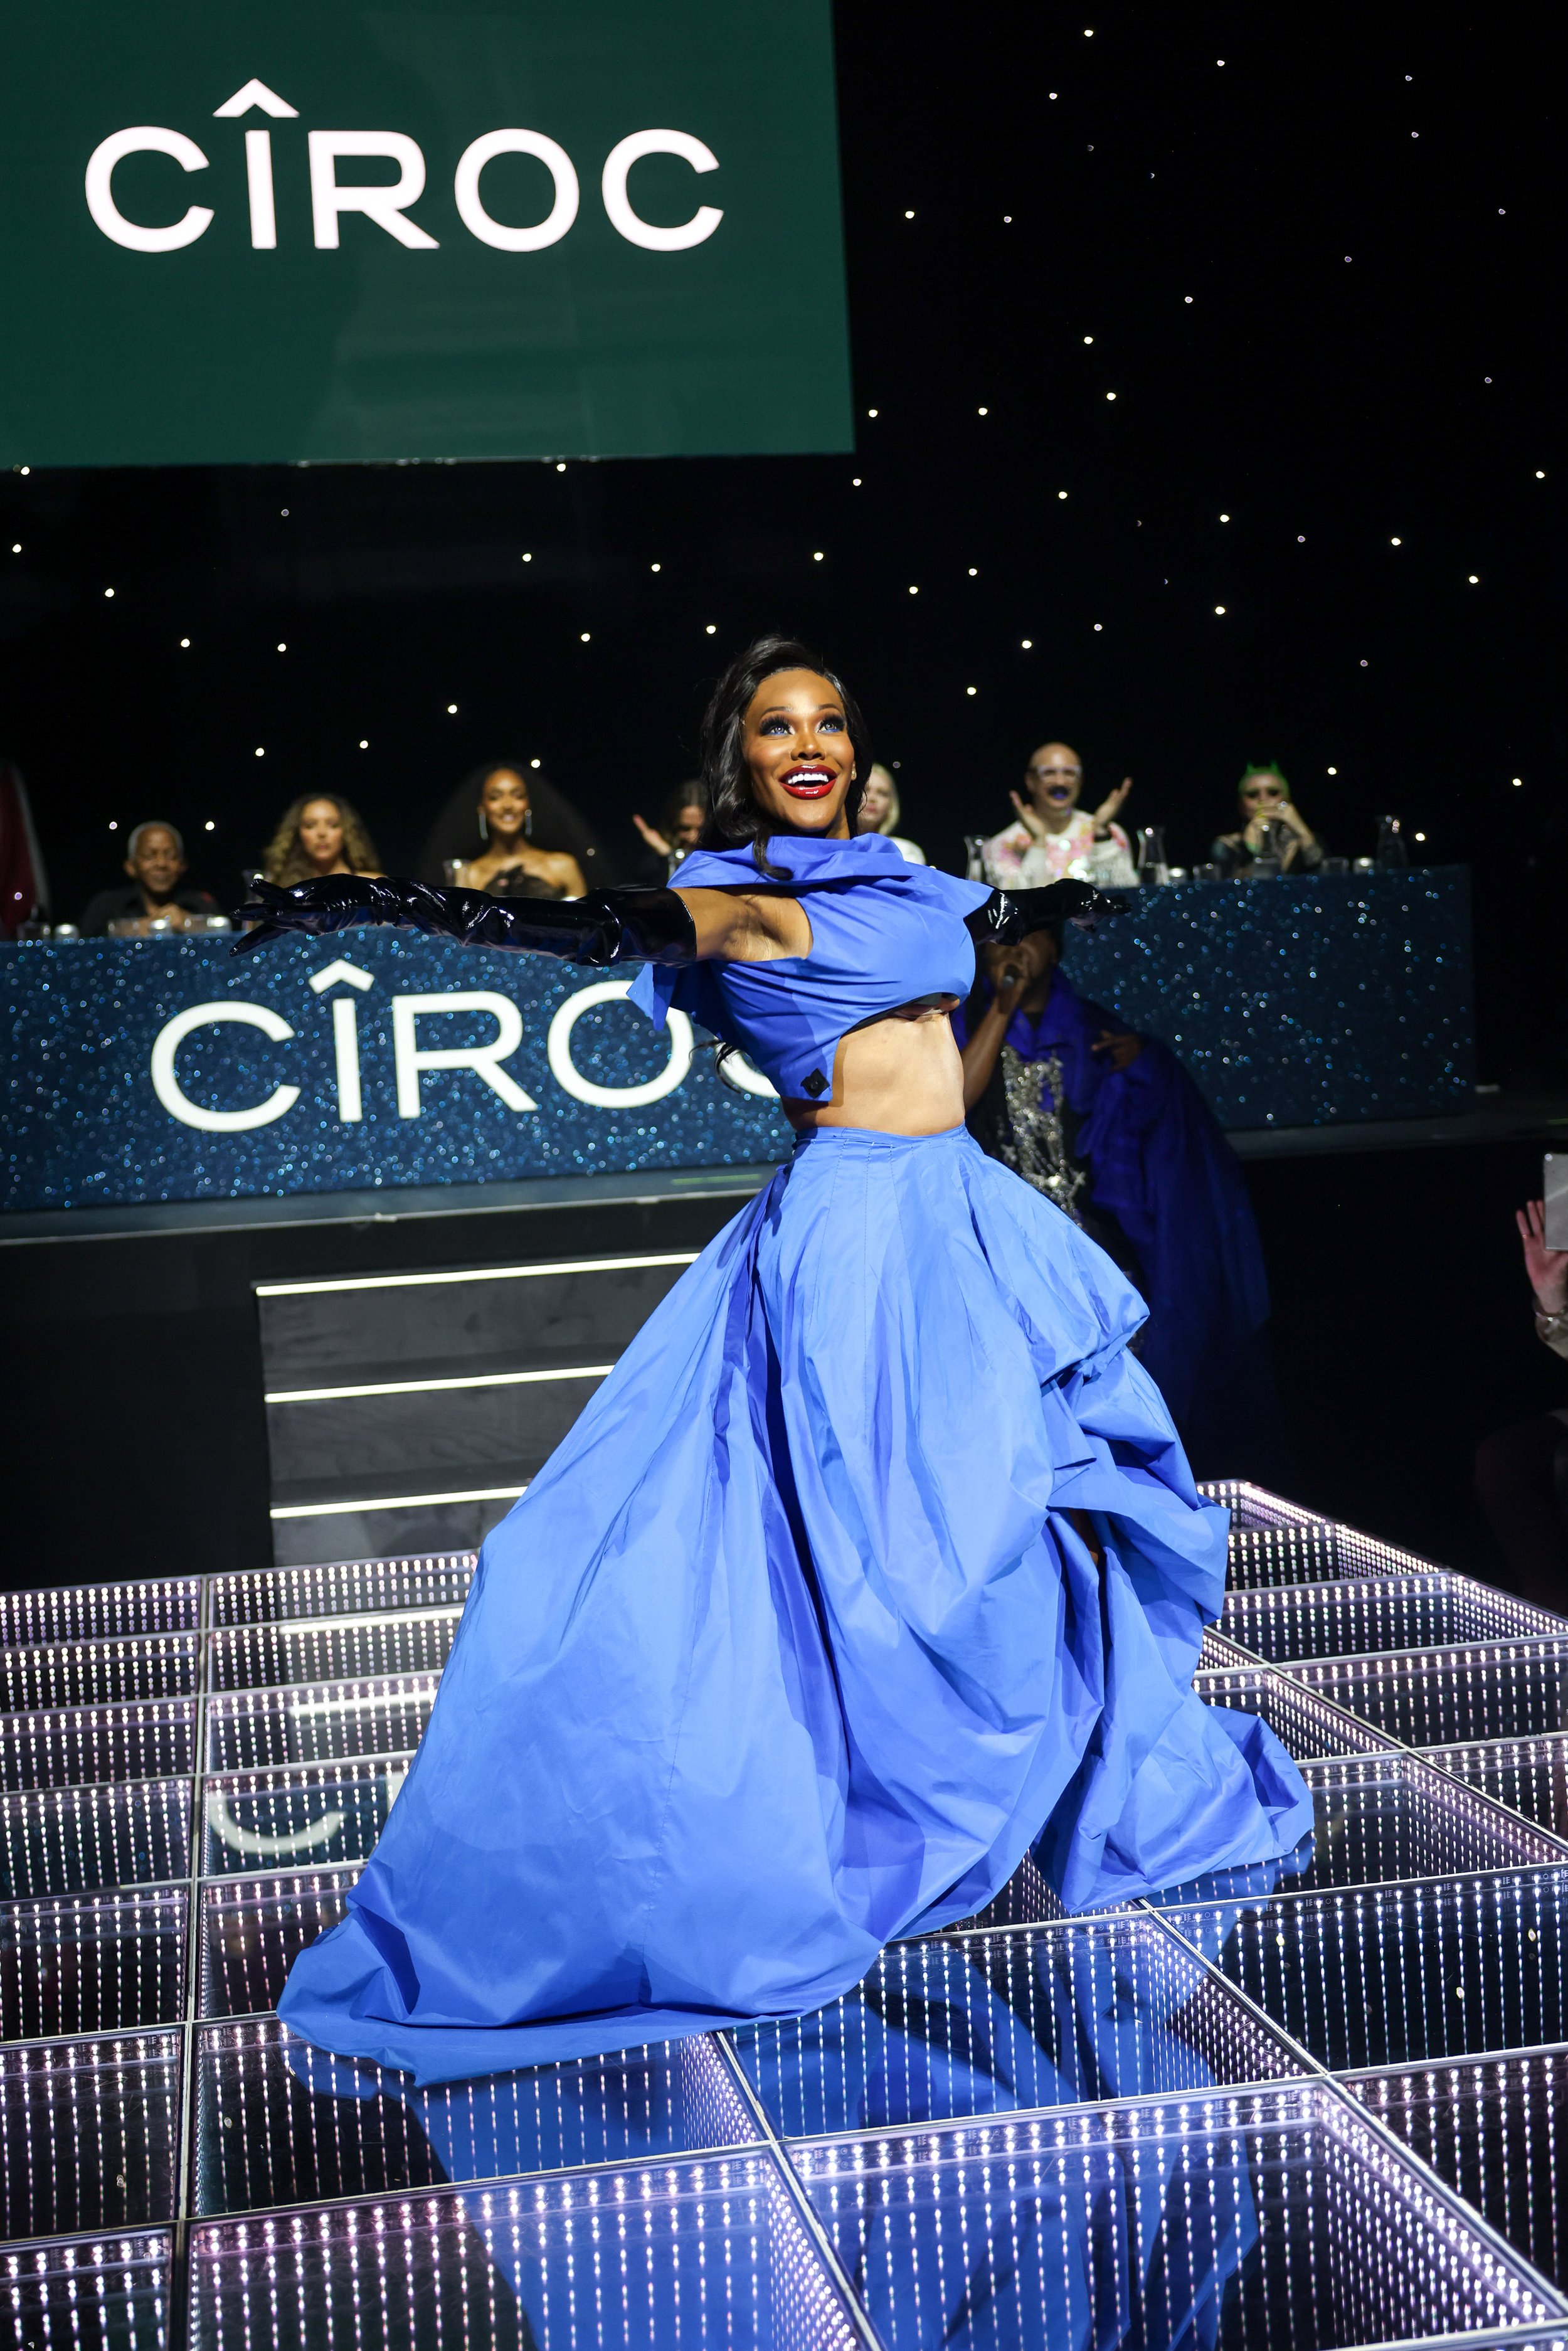  LONDON, ENGLAND - JUNE 30: Stasha Sanchez attends the CÎROC Iconic Ball in support of Not A Phase at KOKO on June 30, 2022 in London, England. Today, the first ever CÎROC Iconic Ball brought the house down at legendary KOKO Camden in celebration of 